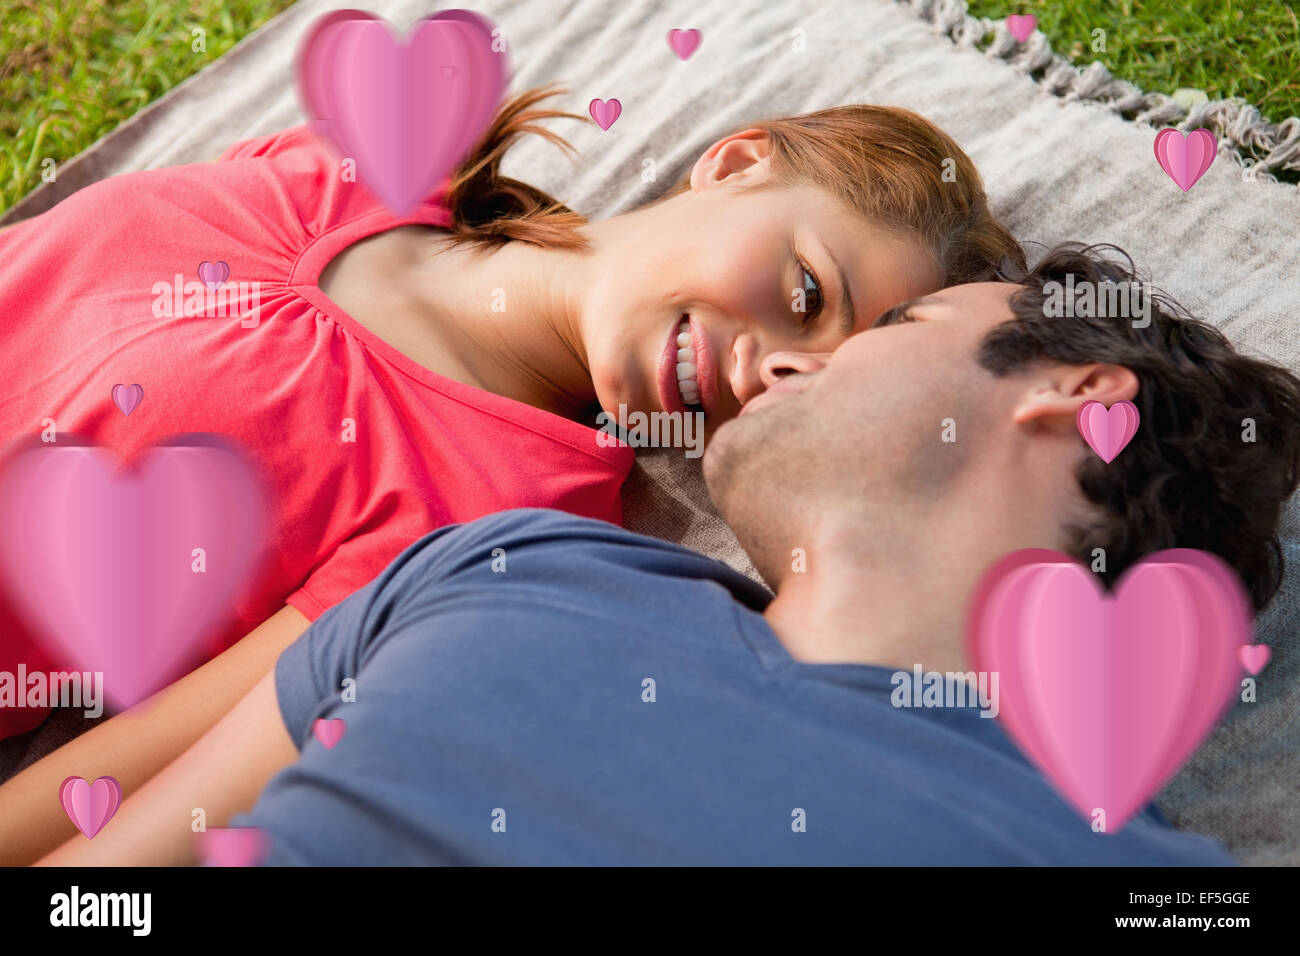 Composite image of woman looking into her friends eyes while lying on a quilt Stock Photo